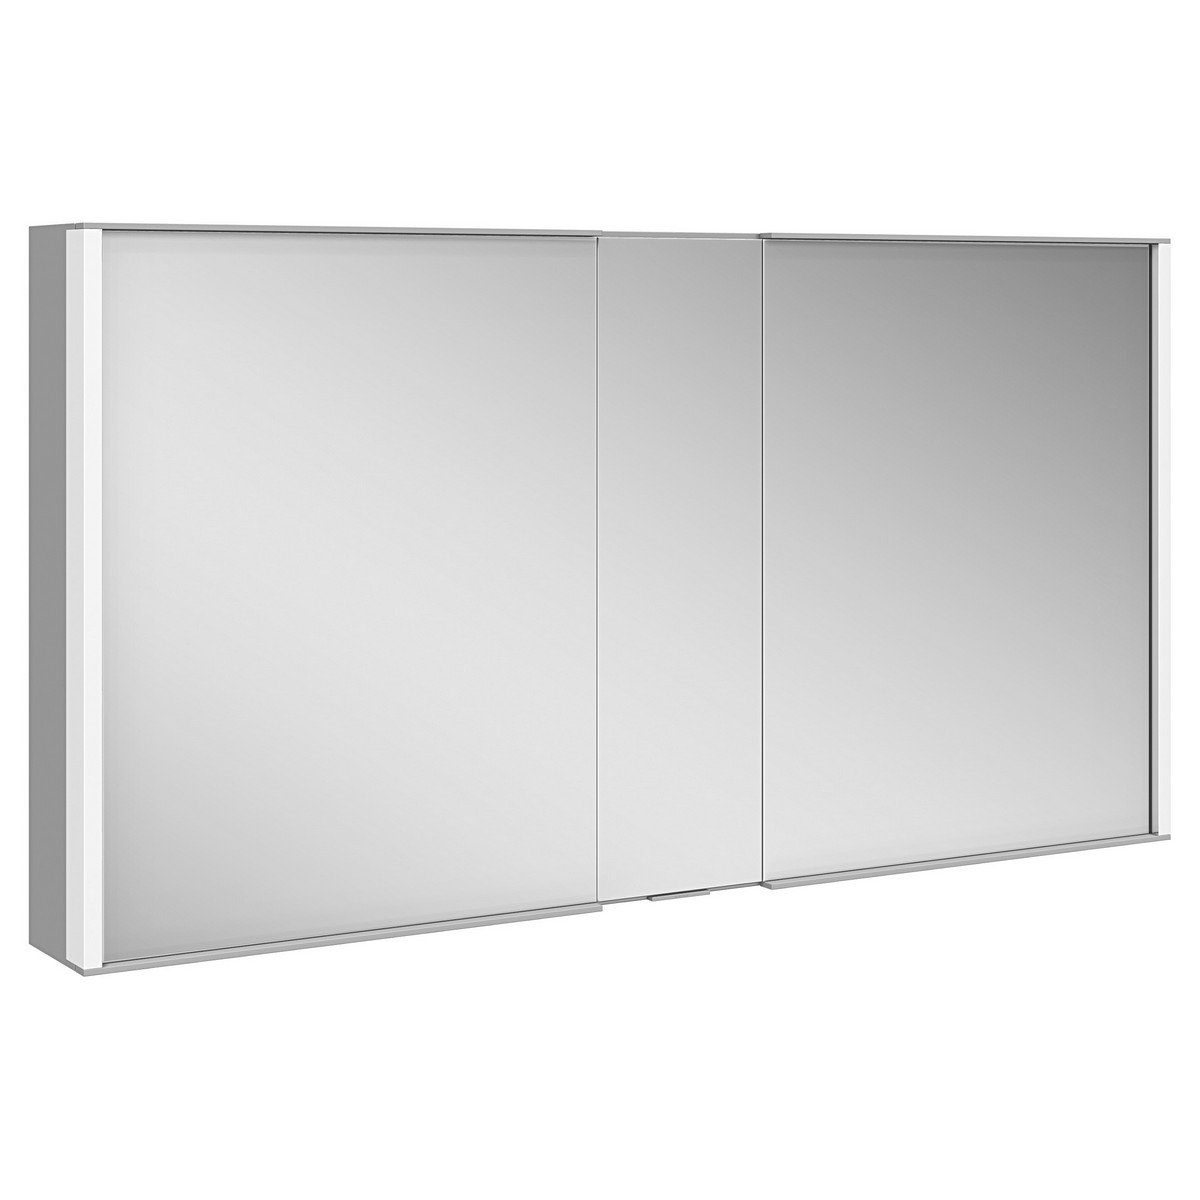 KEUCO 12805171351 ROYAL MATCH 51 1/8 W X 6 1/4 D X 27 1/2 H INCH 2-DOOR WALL MOUNTED MIRROR MEDICINE CABINET IN ALUMINUM